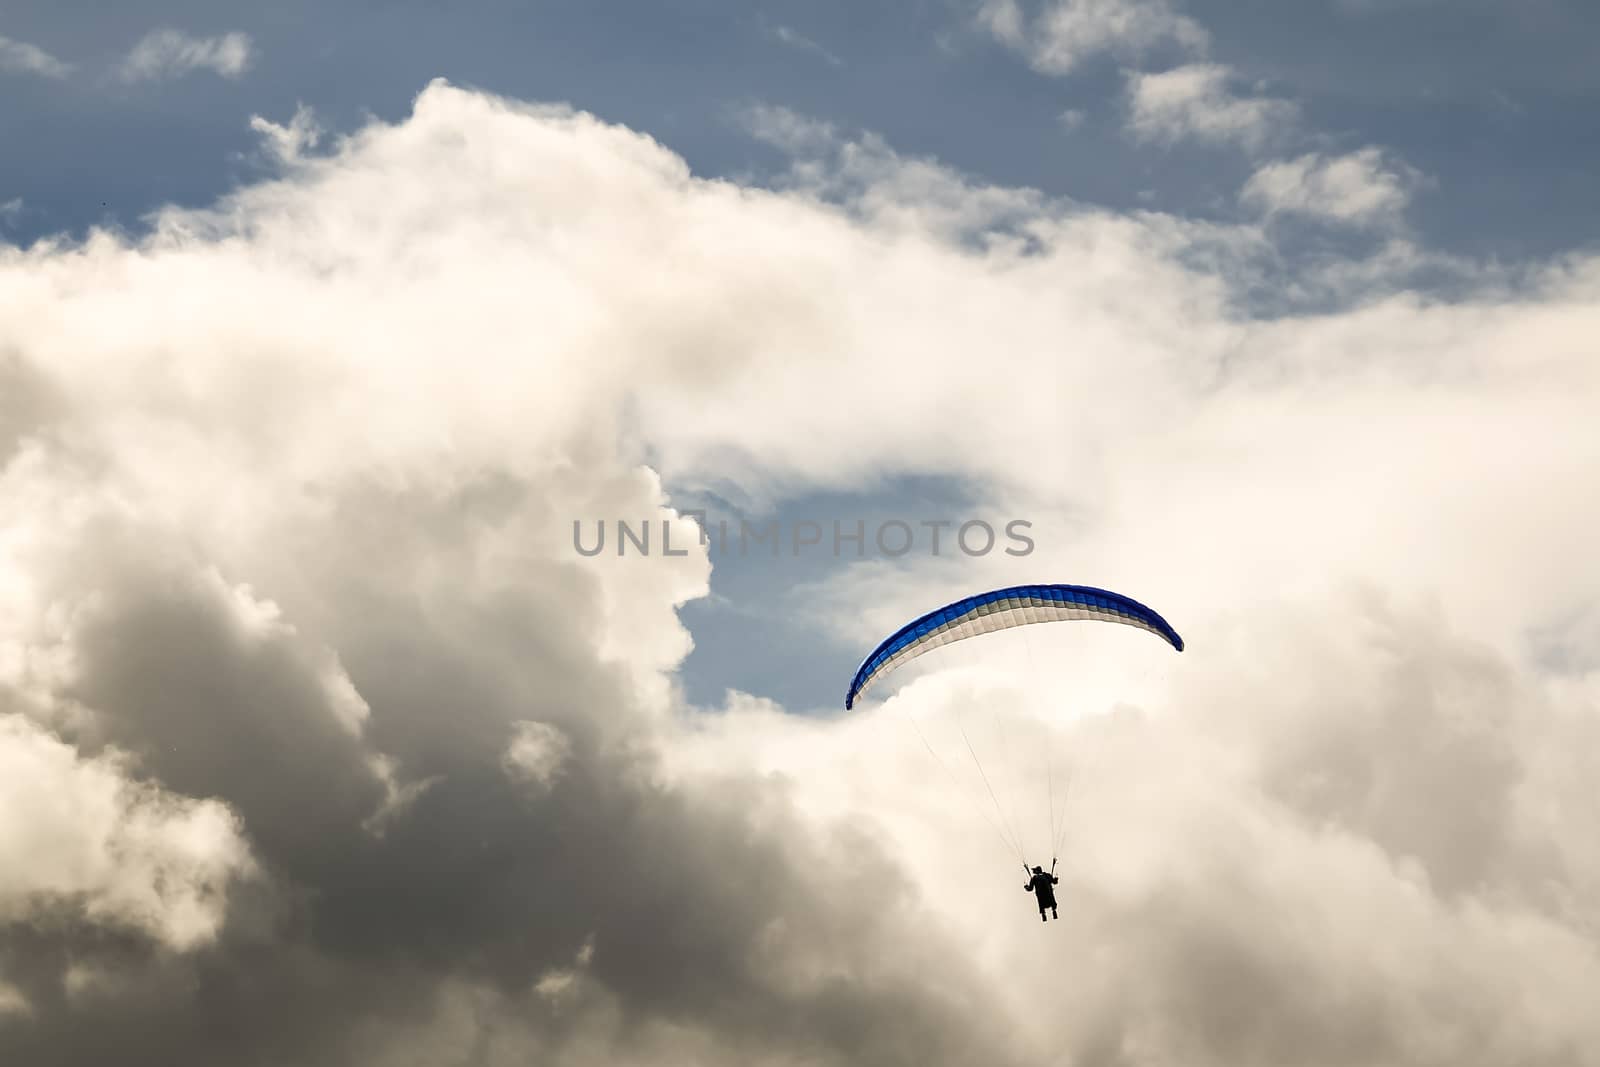 Paragliding against the dramatic cloudy sky